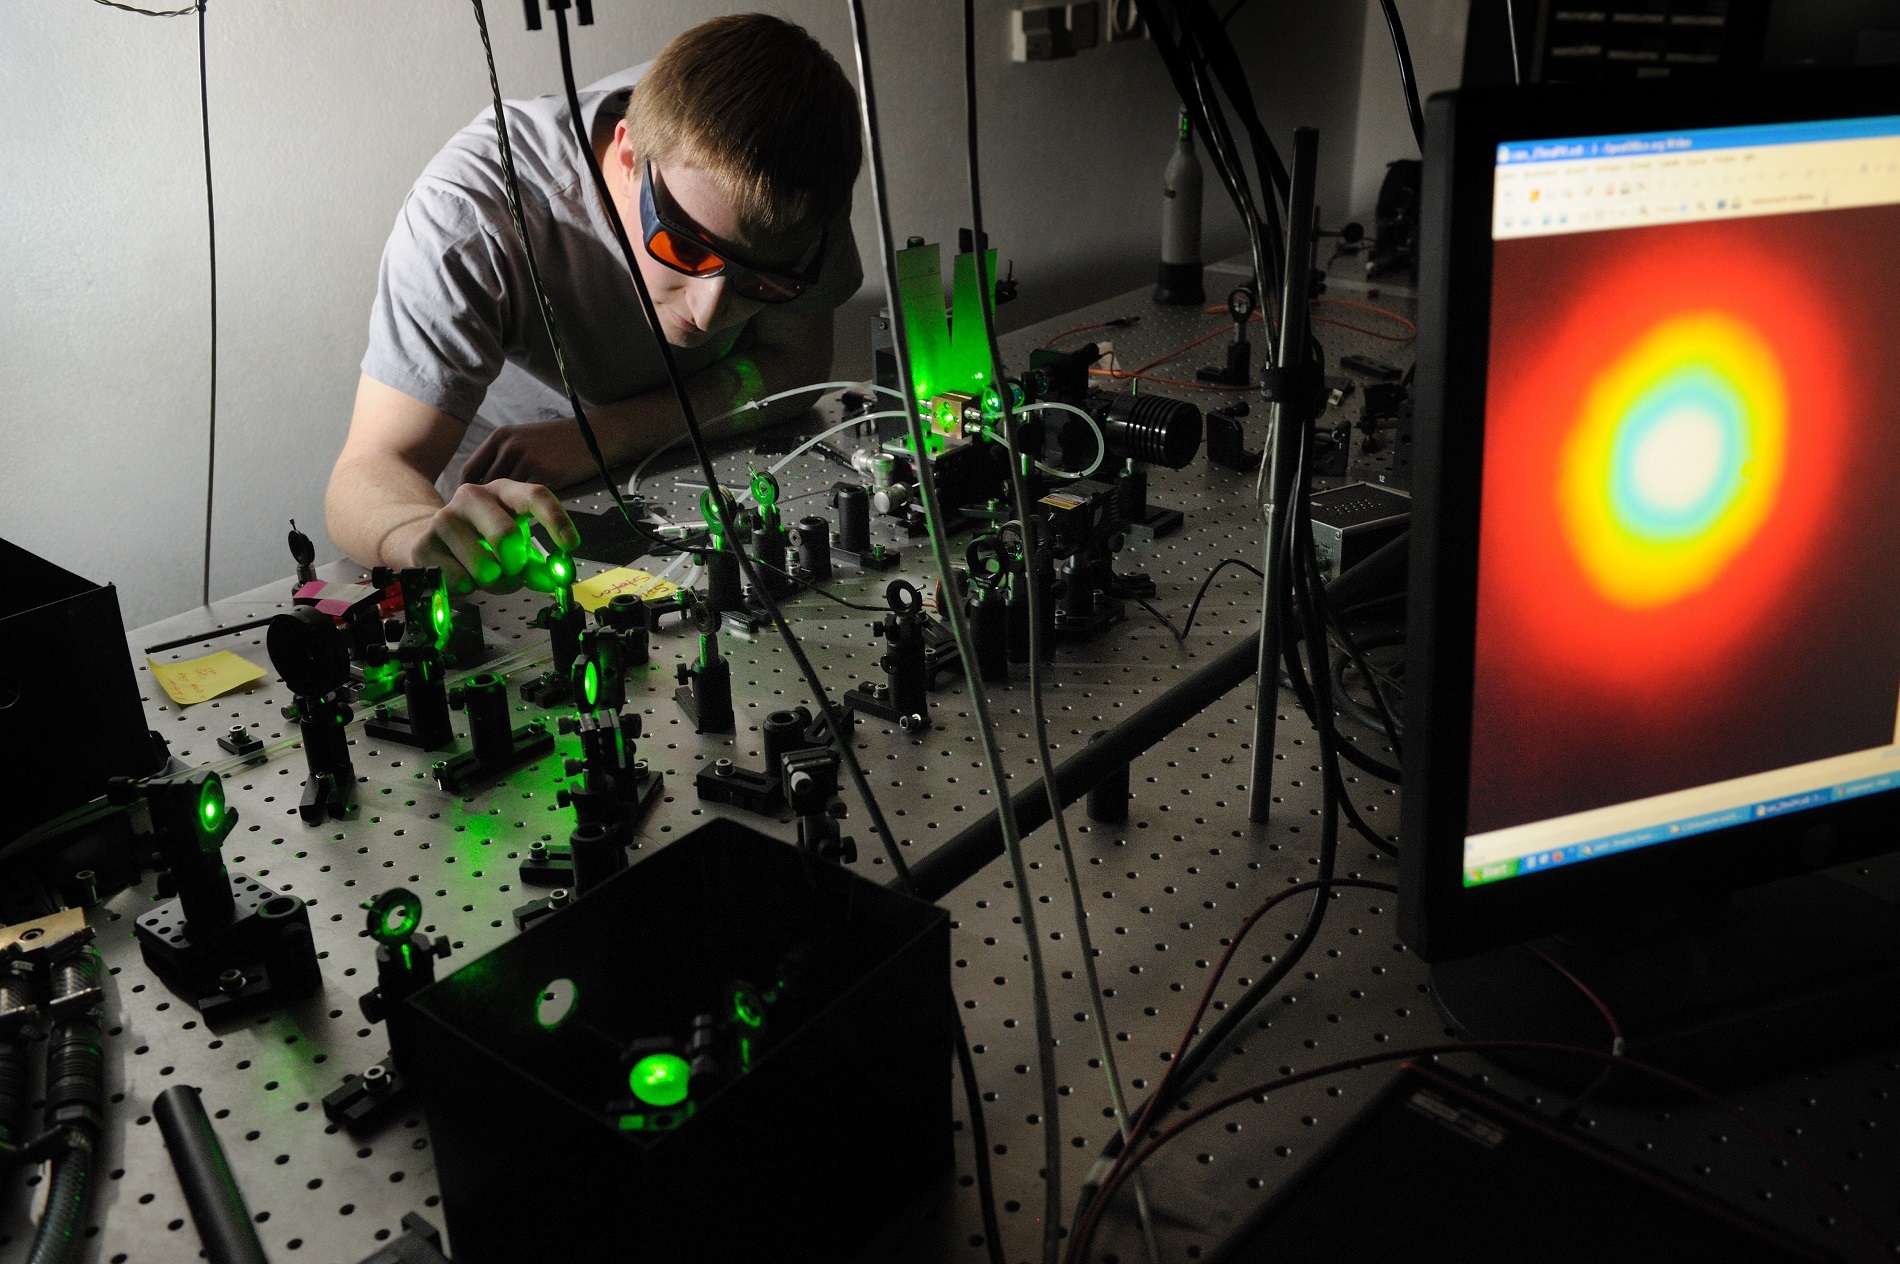 Dr. Stefan Lerch is adjusting the source of energy entangled photons, which was used in an experiment demonstrating a transition from quantum to classical energy correlations